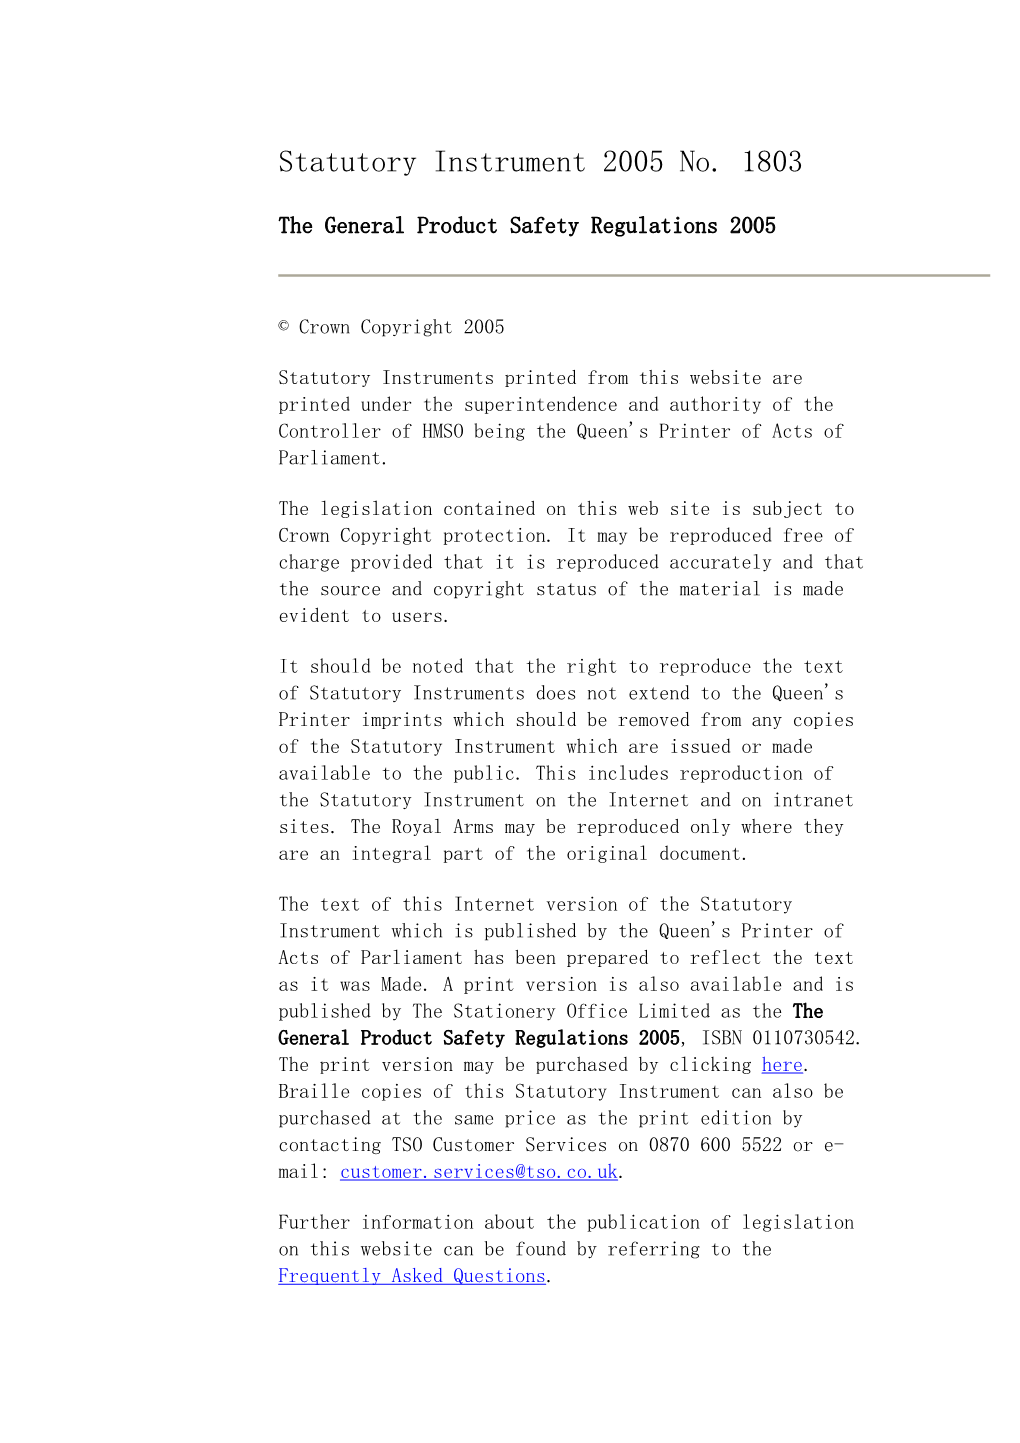 The General Product Safety Regulations 2005